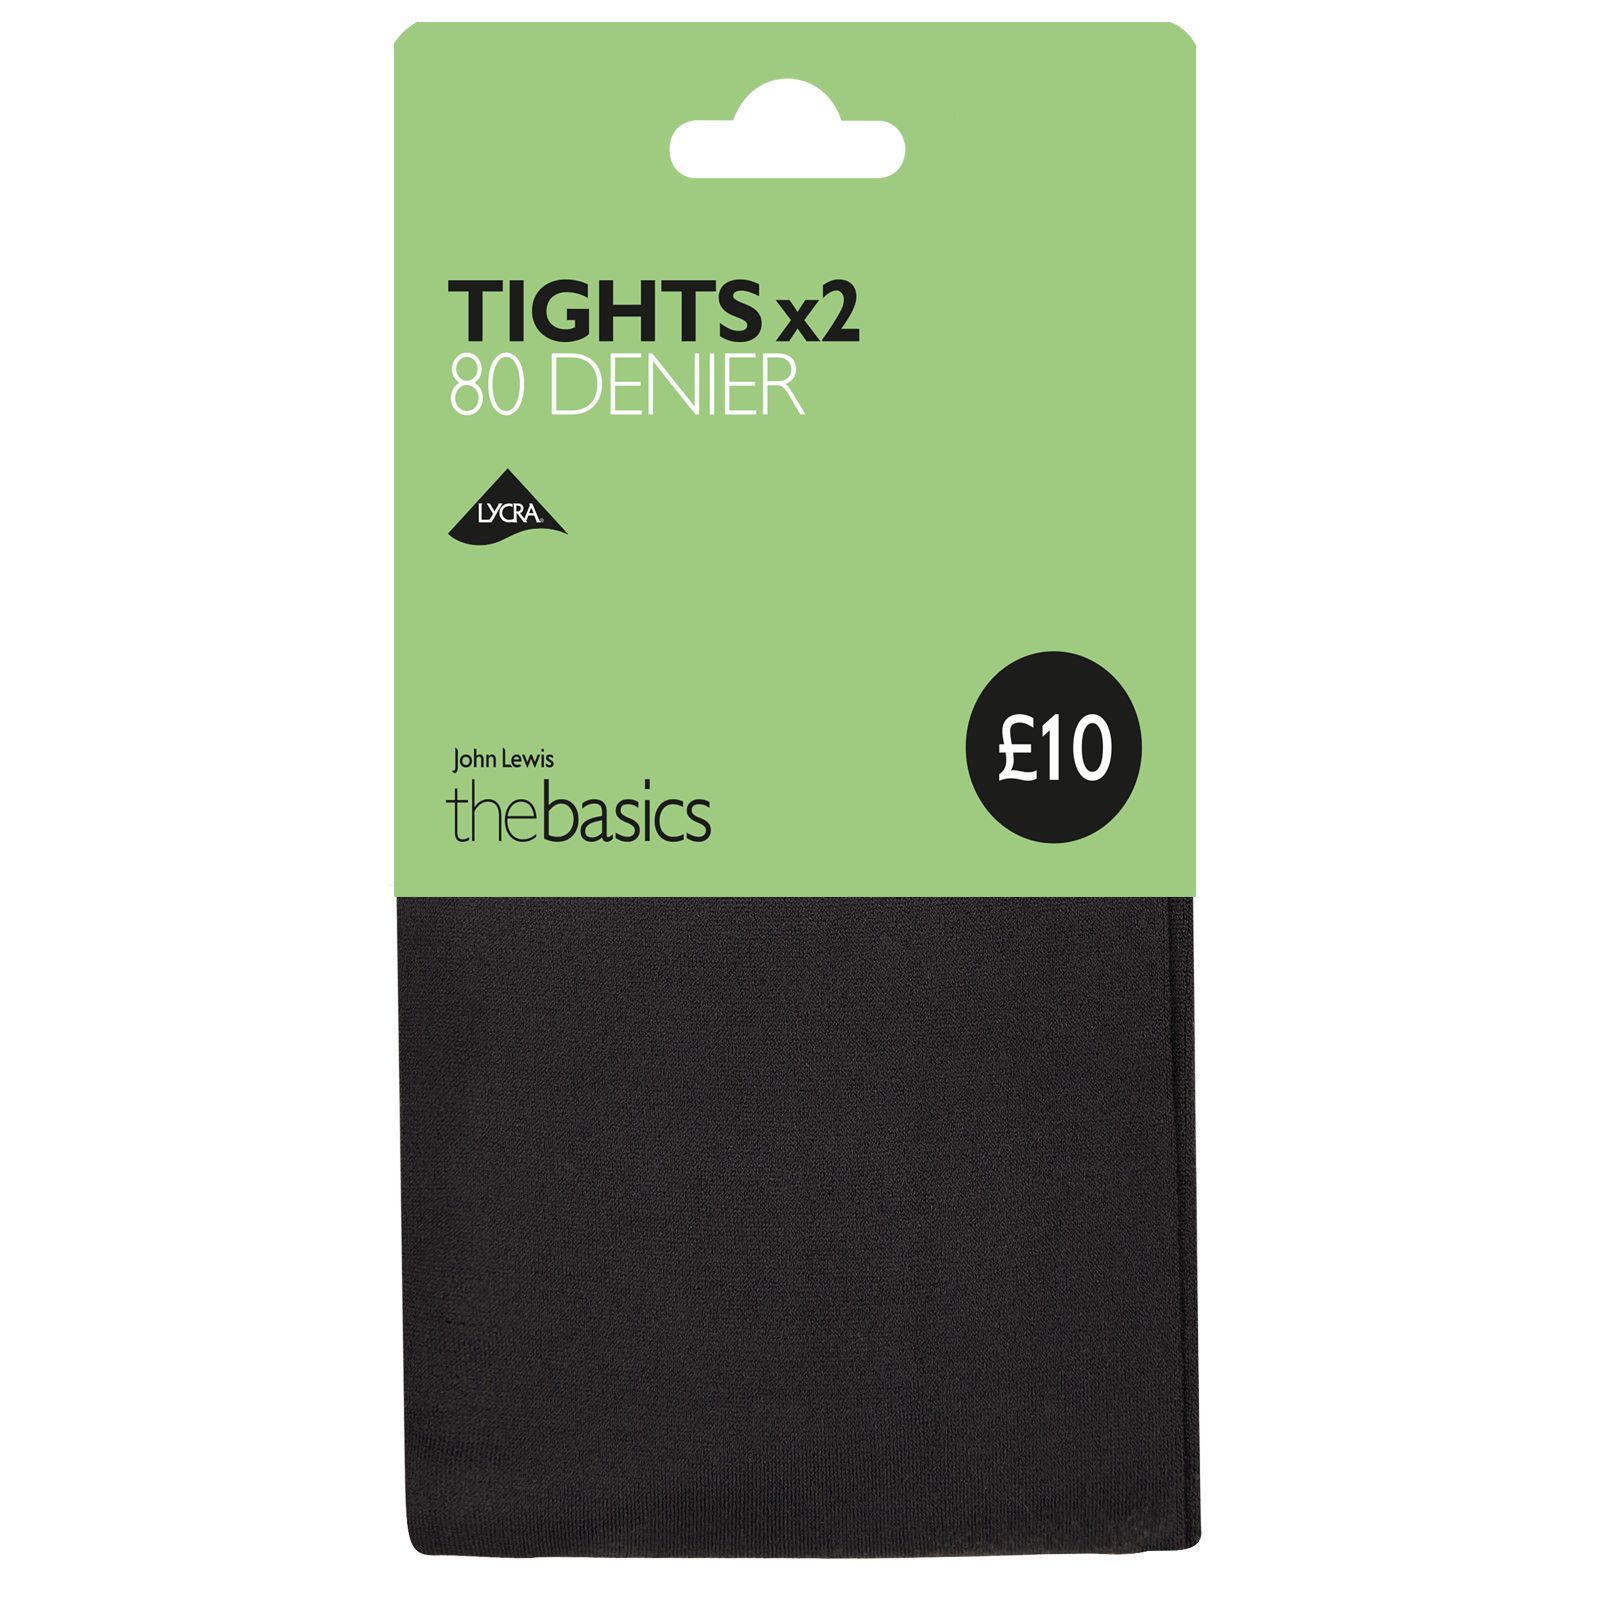 John Lewis 80 Denier Opaque Tights, Pack of 2